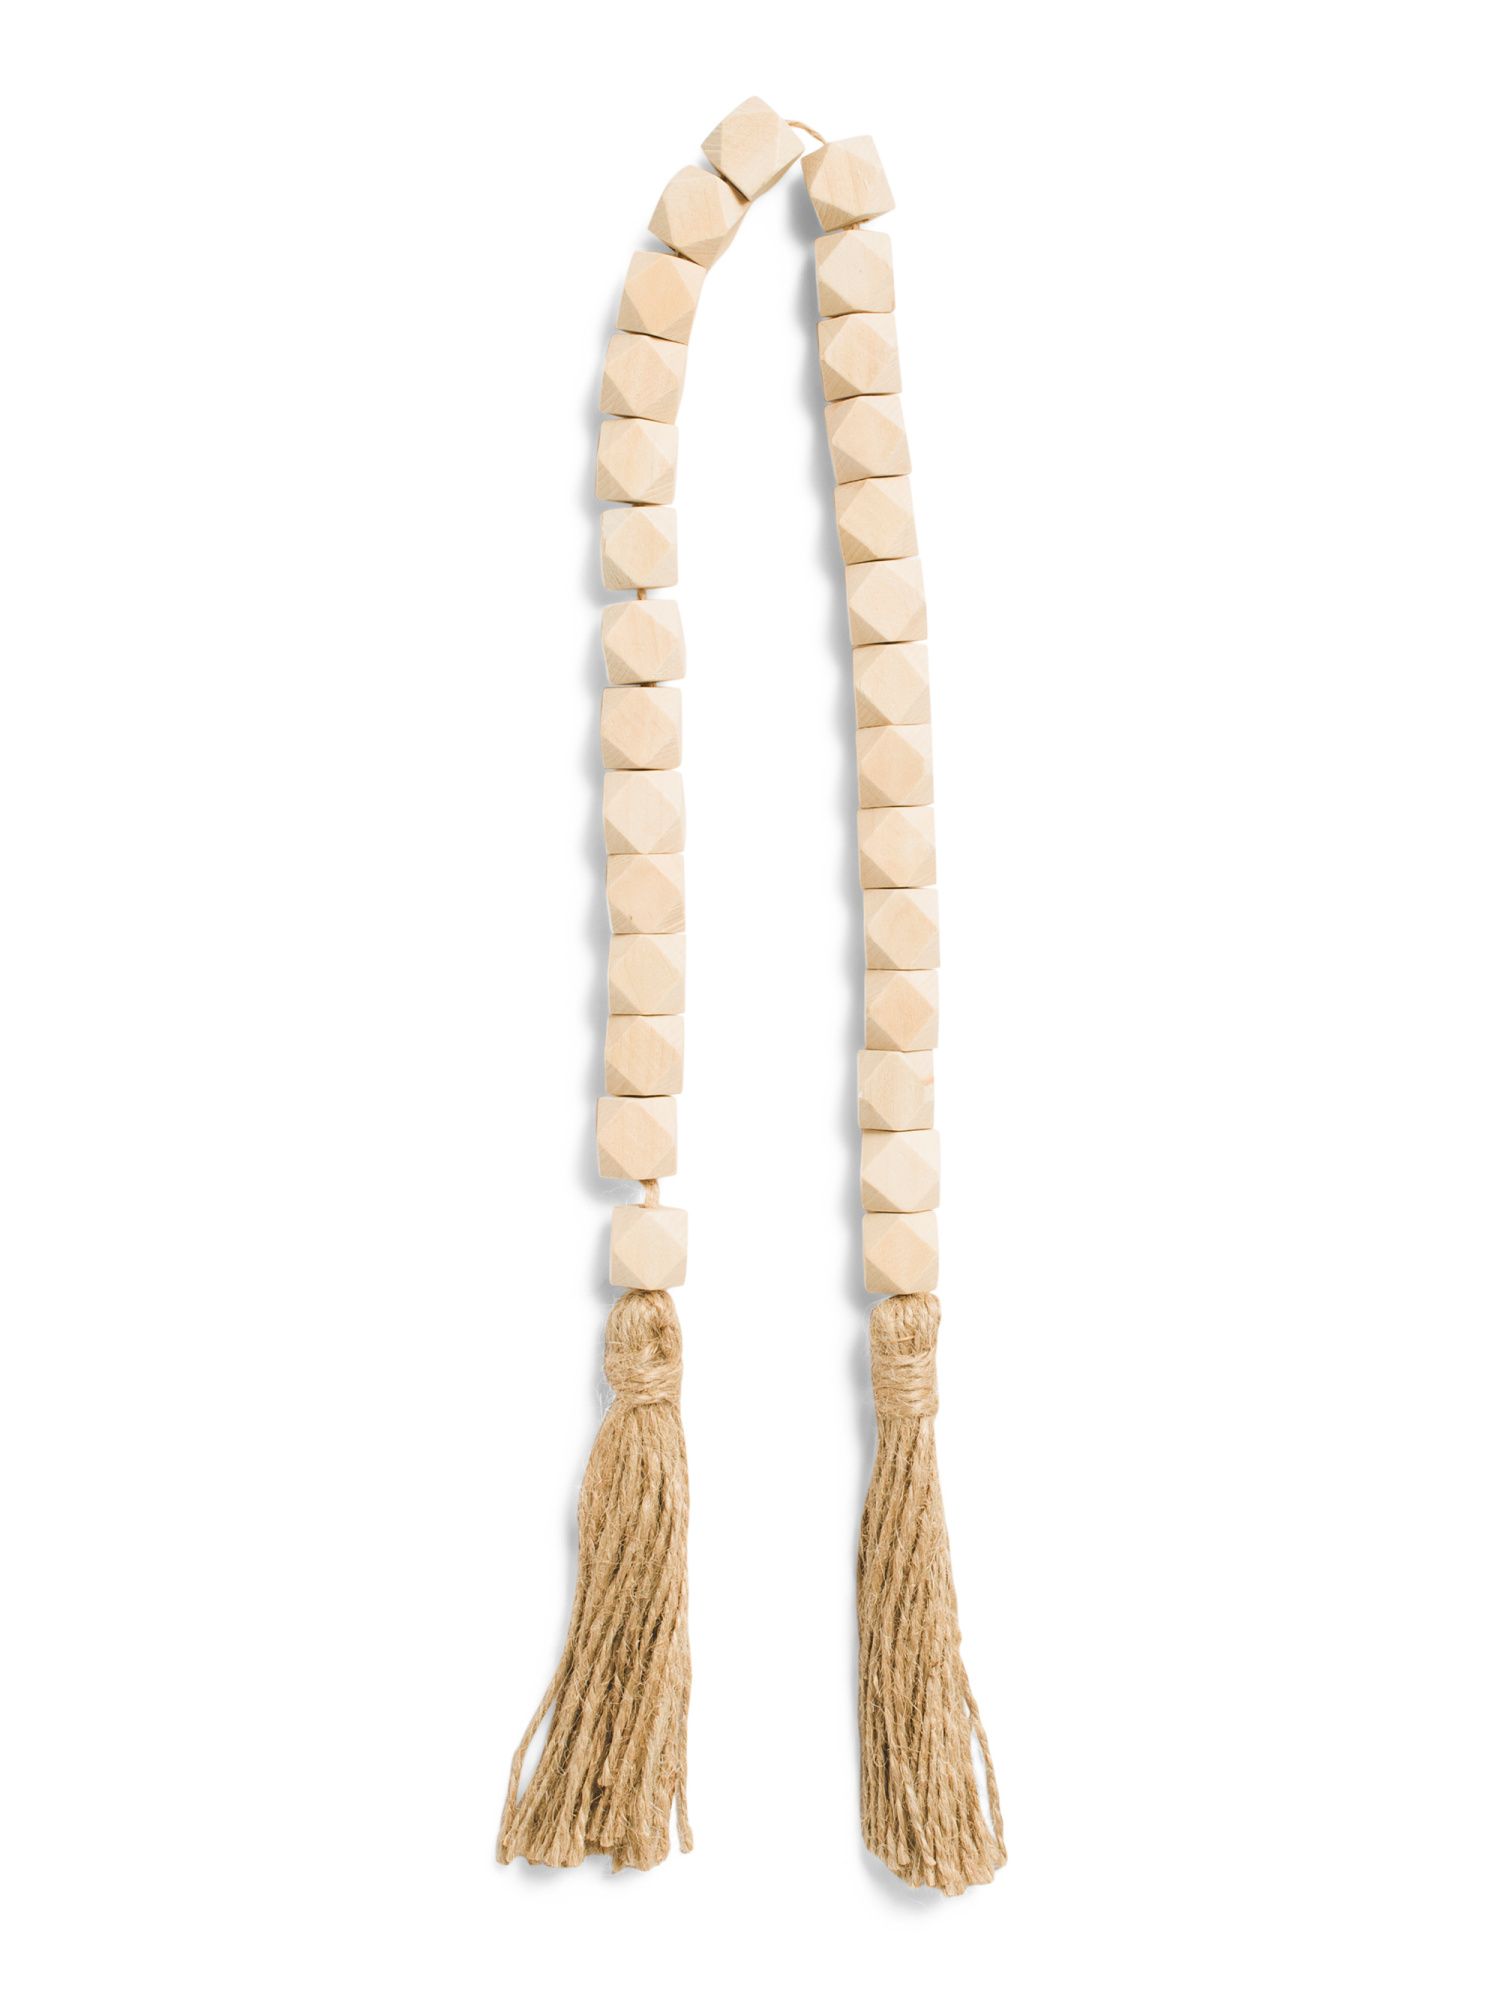 24in Beads With Tassels | TJ Maxx